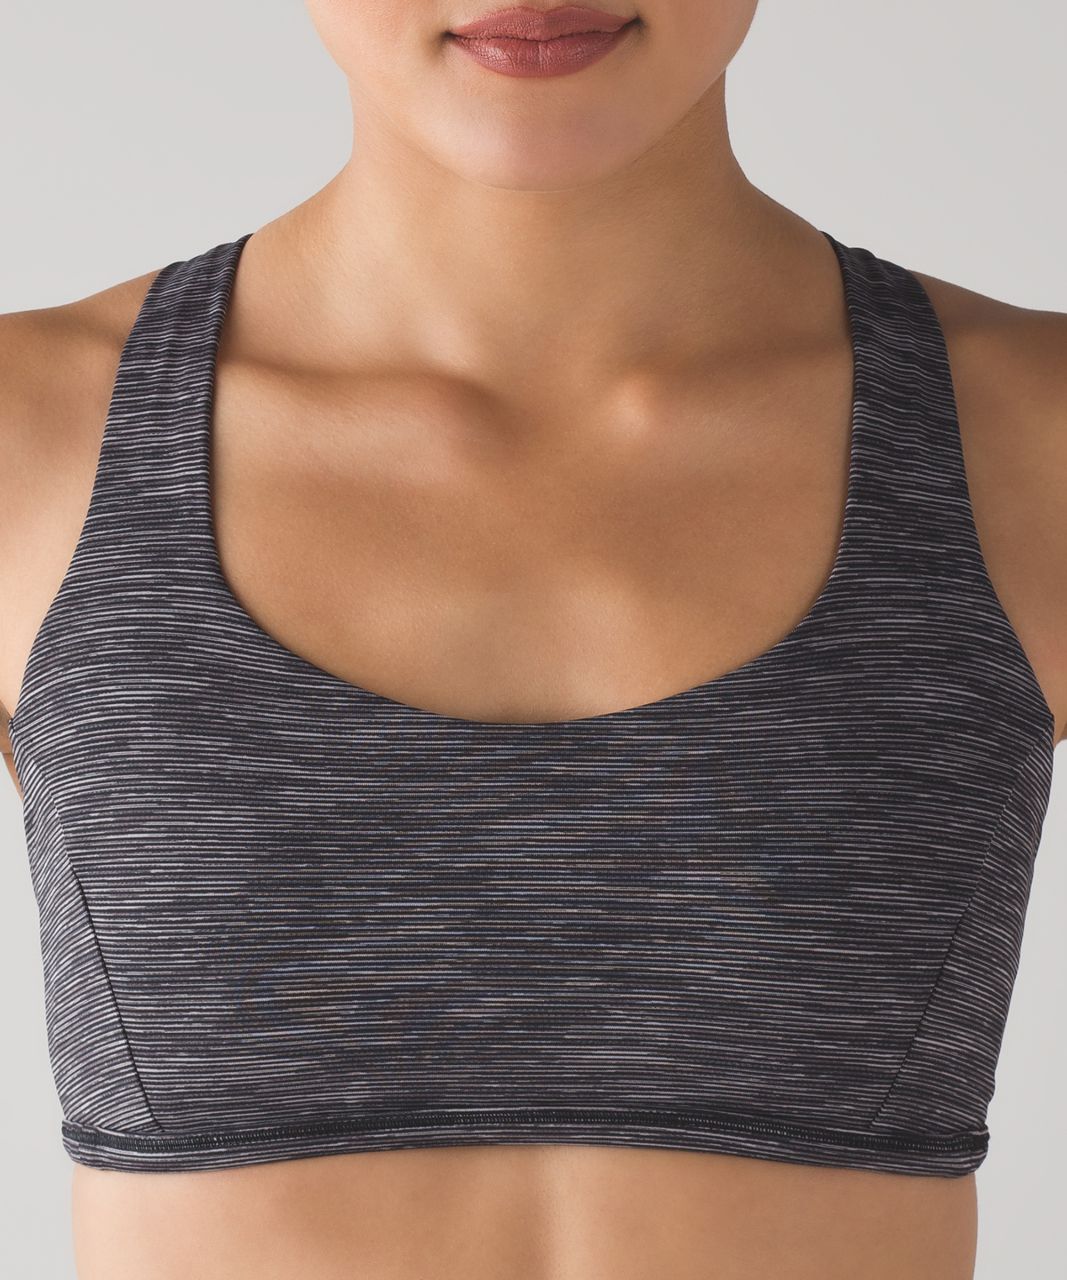 Lululemon Free To Be Tranquil Bra - Wee Are From Space Deep Coal Battleship